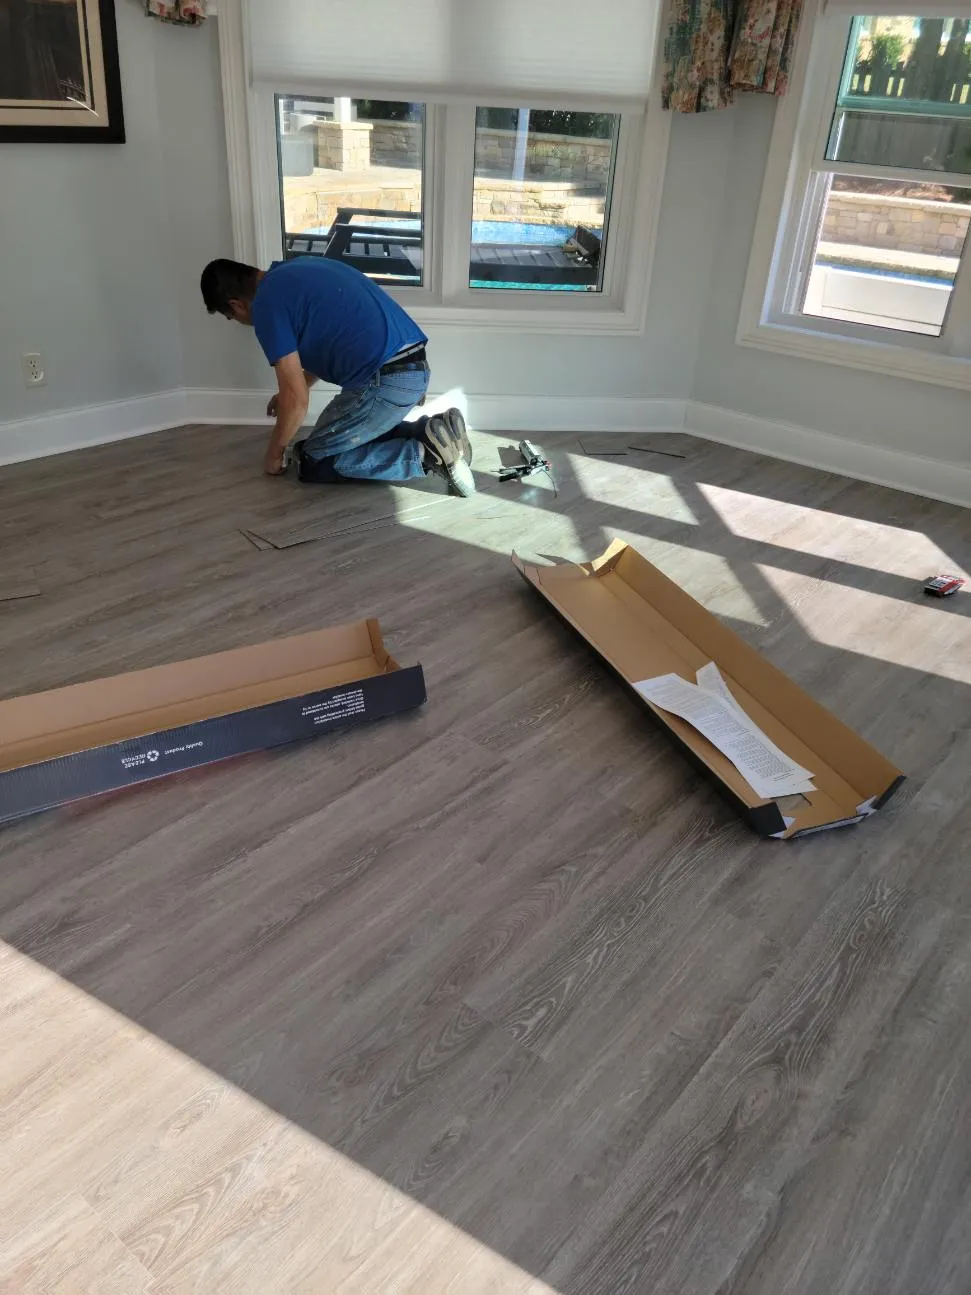 Laminate flooring being installed in well lit room